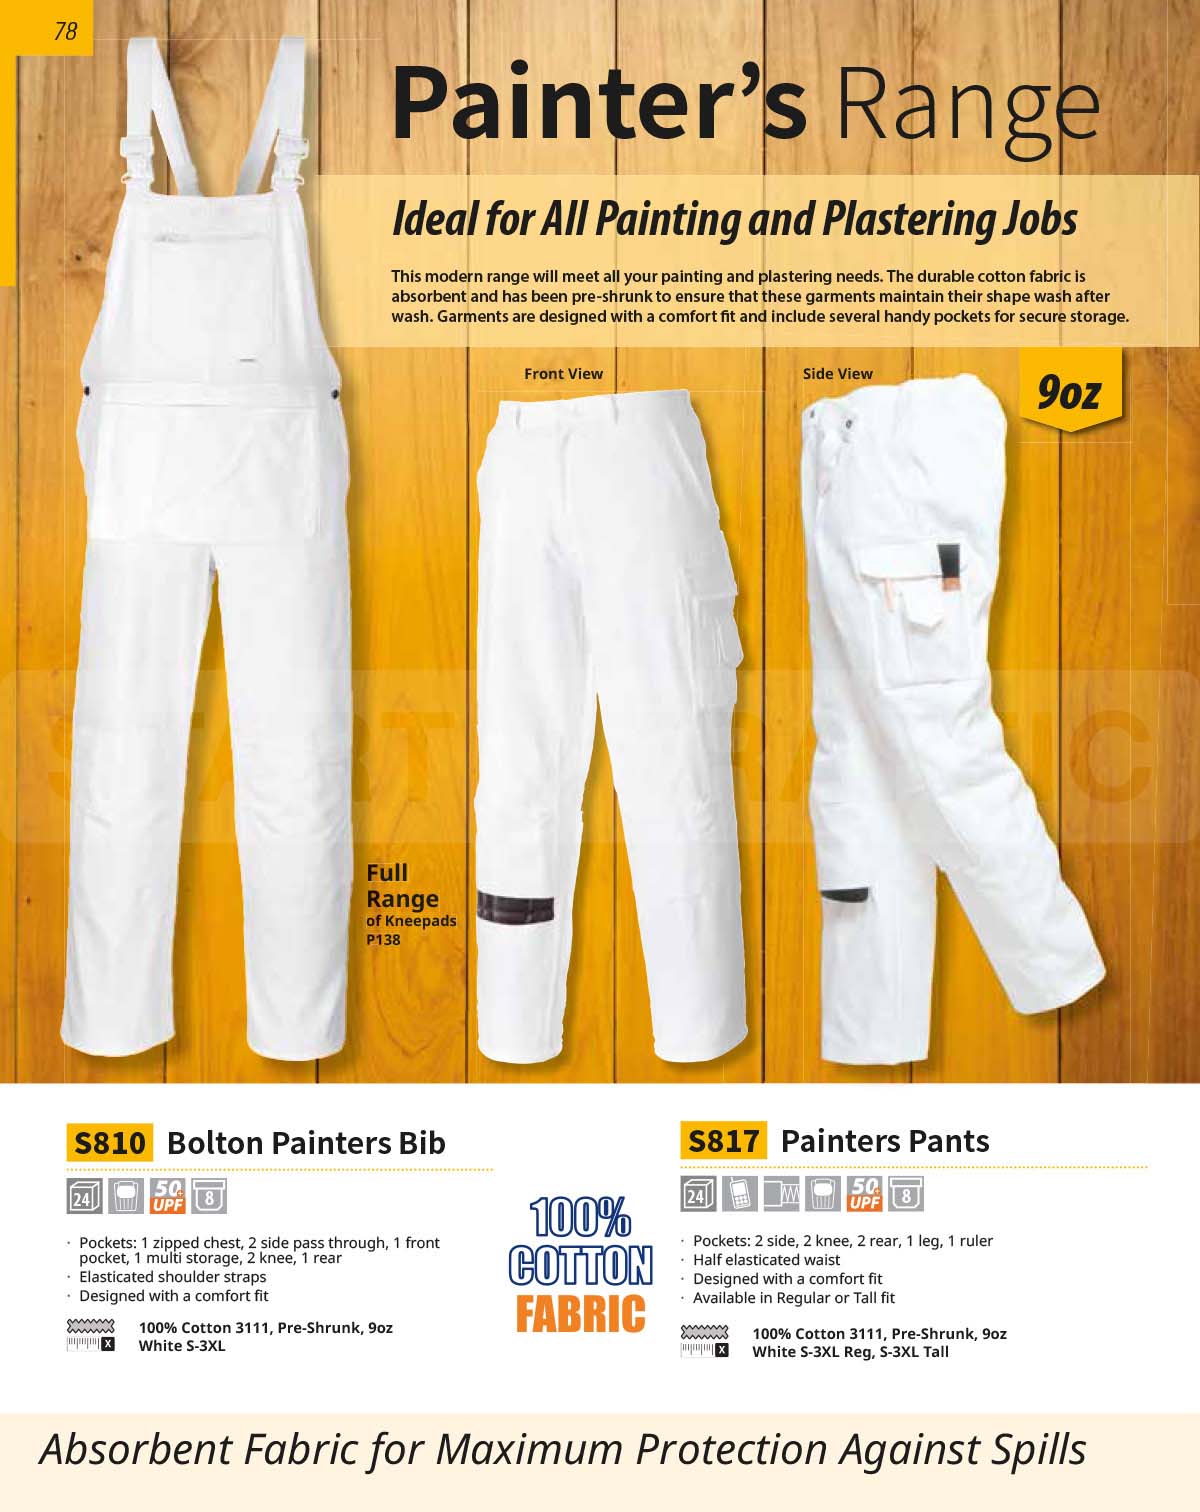 View The Bolton Painters Bib In the Catalogue